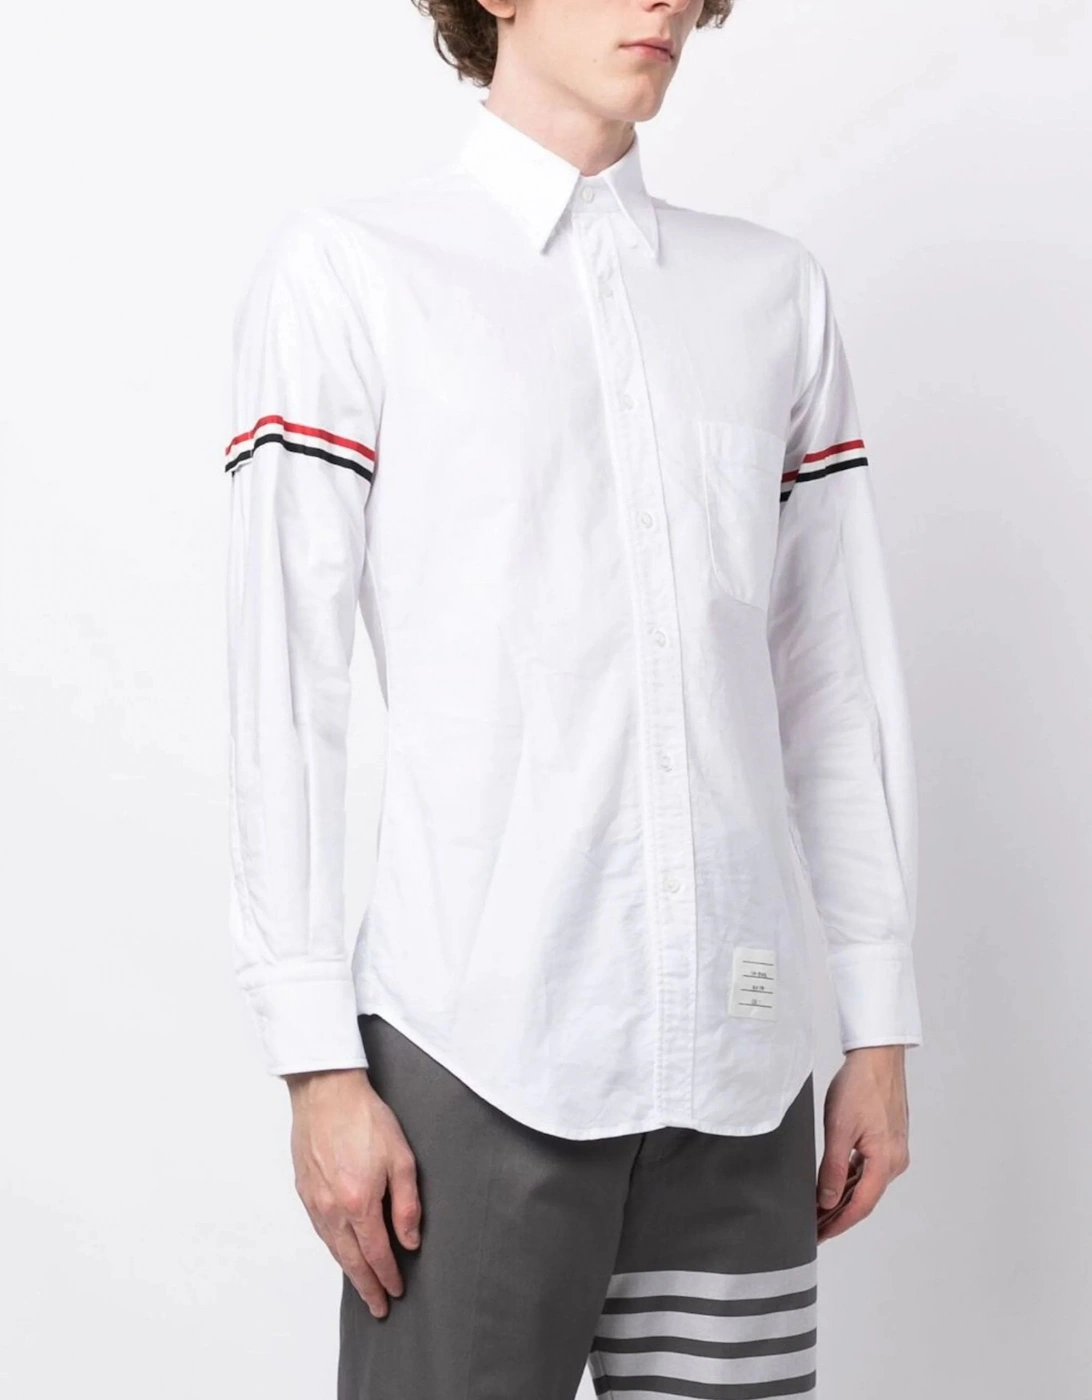 Armband In Oxford Shirt White